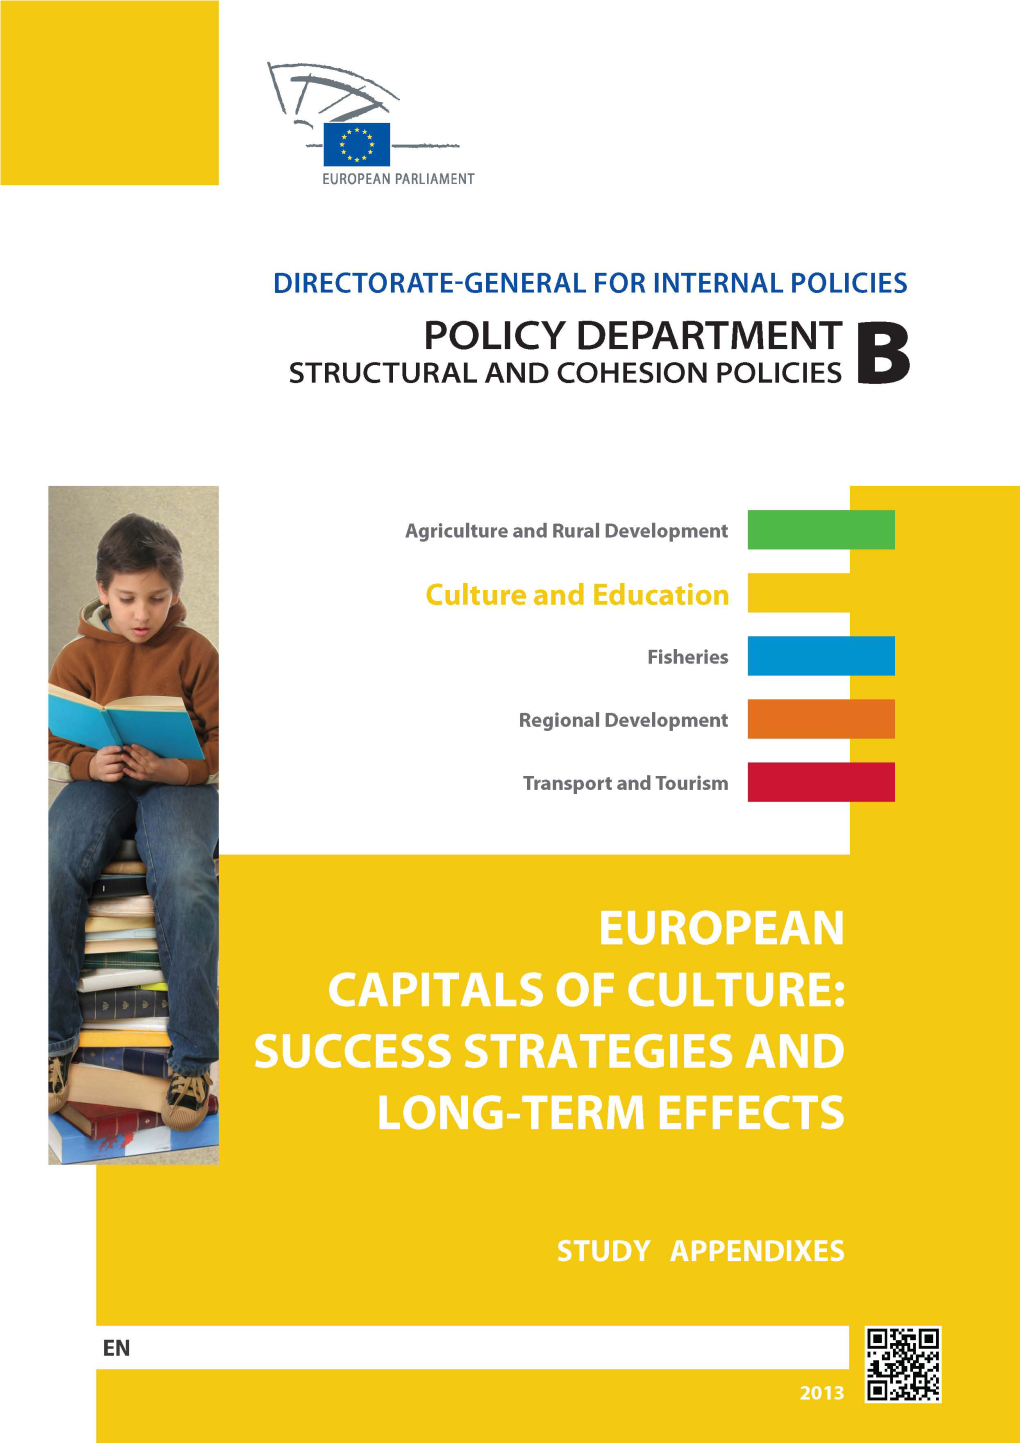 European Capitals of Culture: Success Strategies and Long-Term Effects